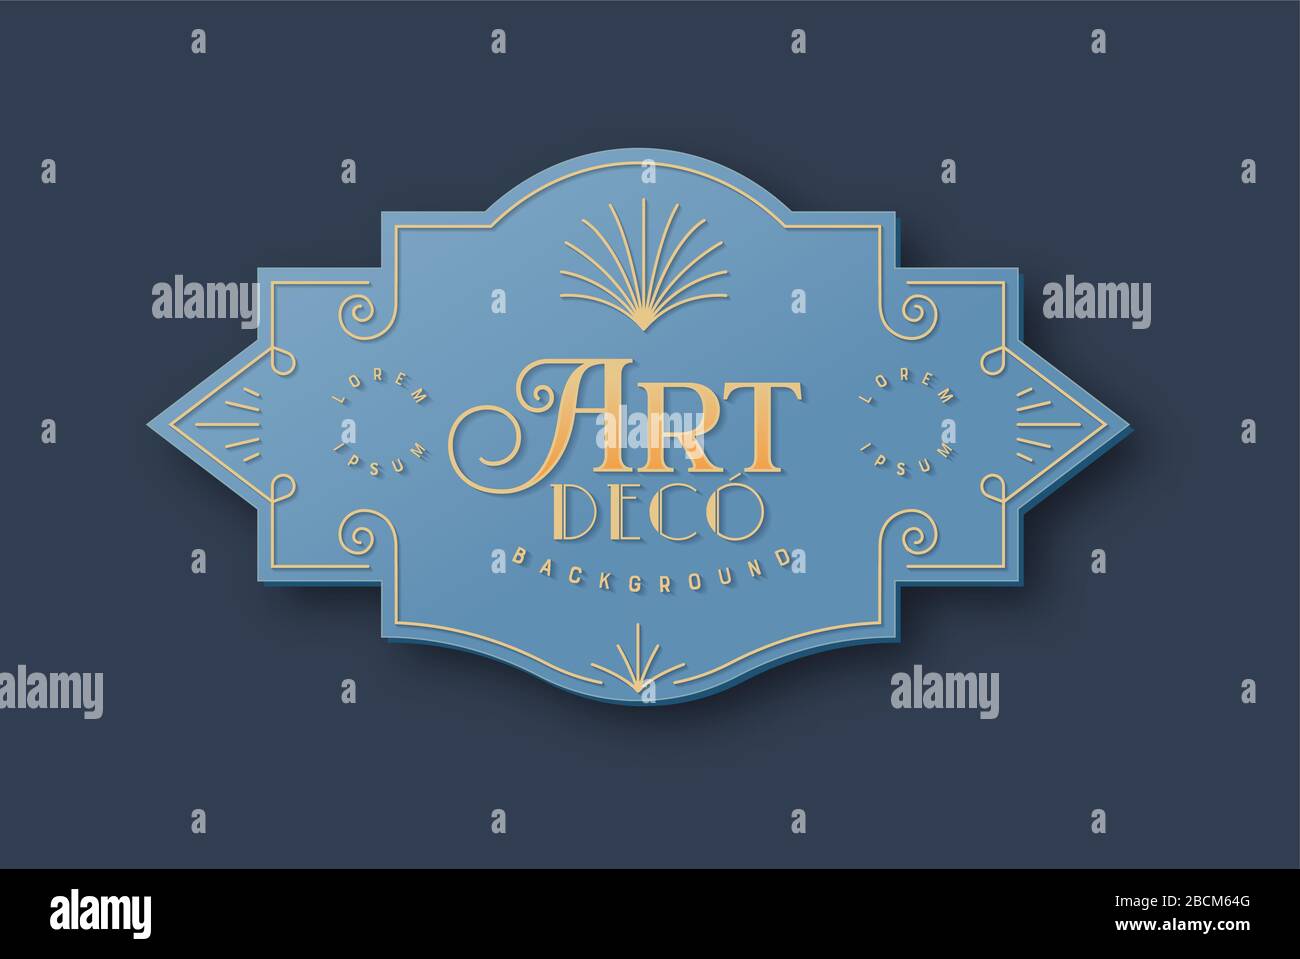 Art deco background template in vintage style. Isolated retro 3D frame with traditional geometric line decoration, text quote and ornate border. Stock Vector